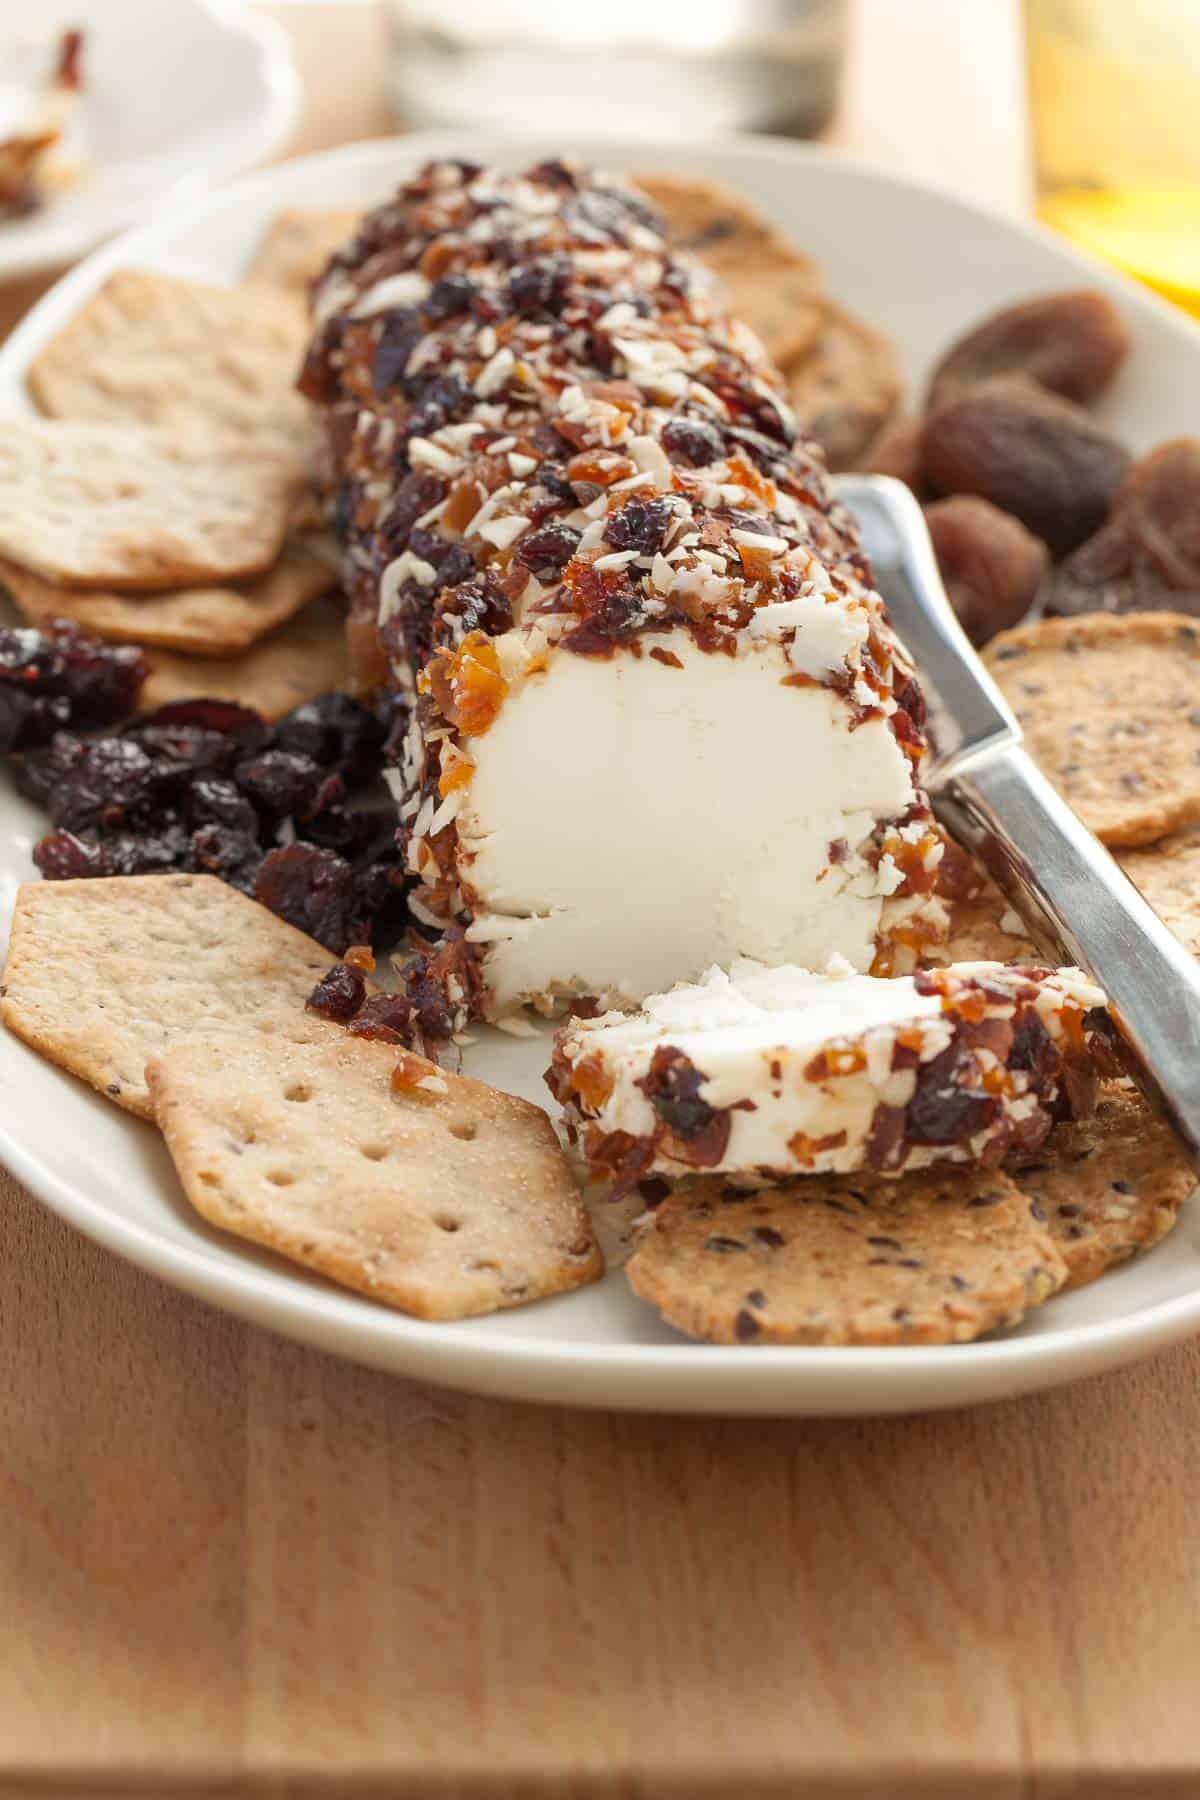 Cranberry Goat Cheese Appetizer with Fruit and Nuts